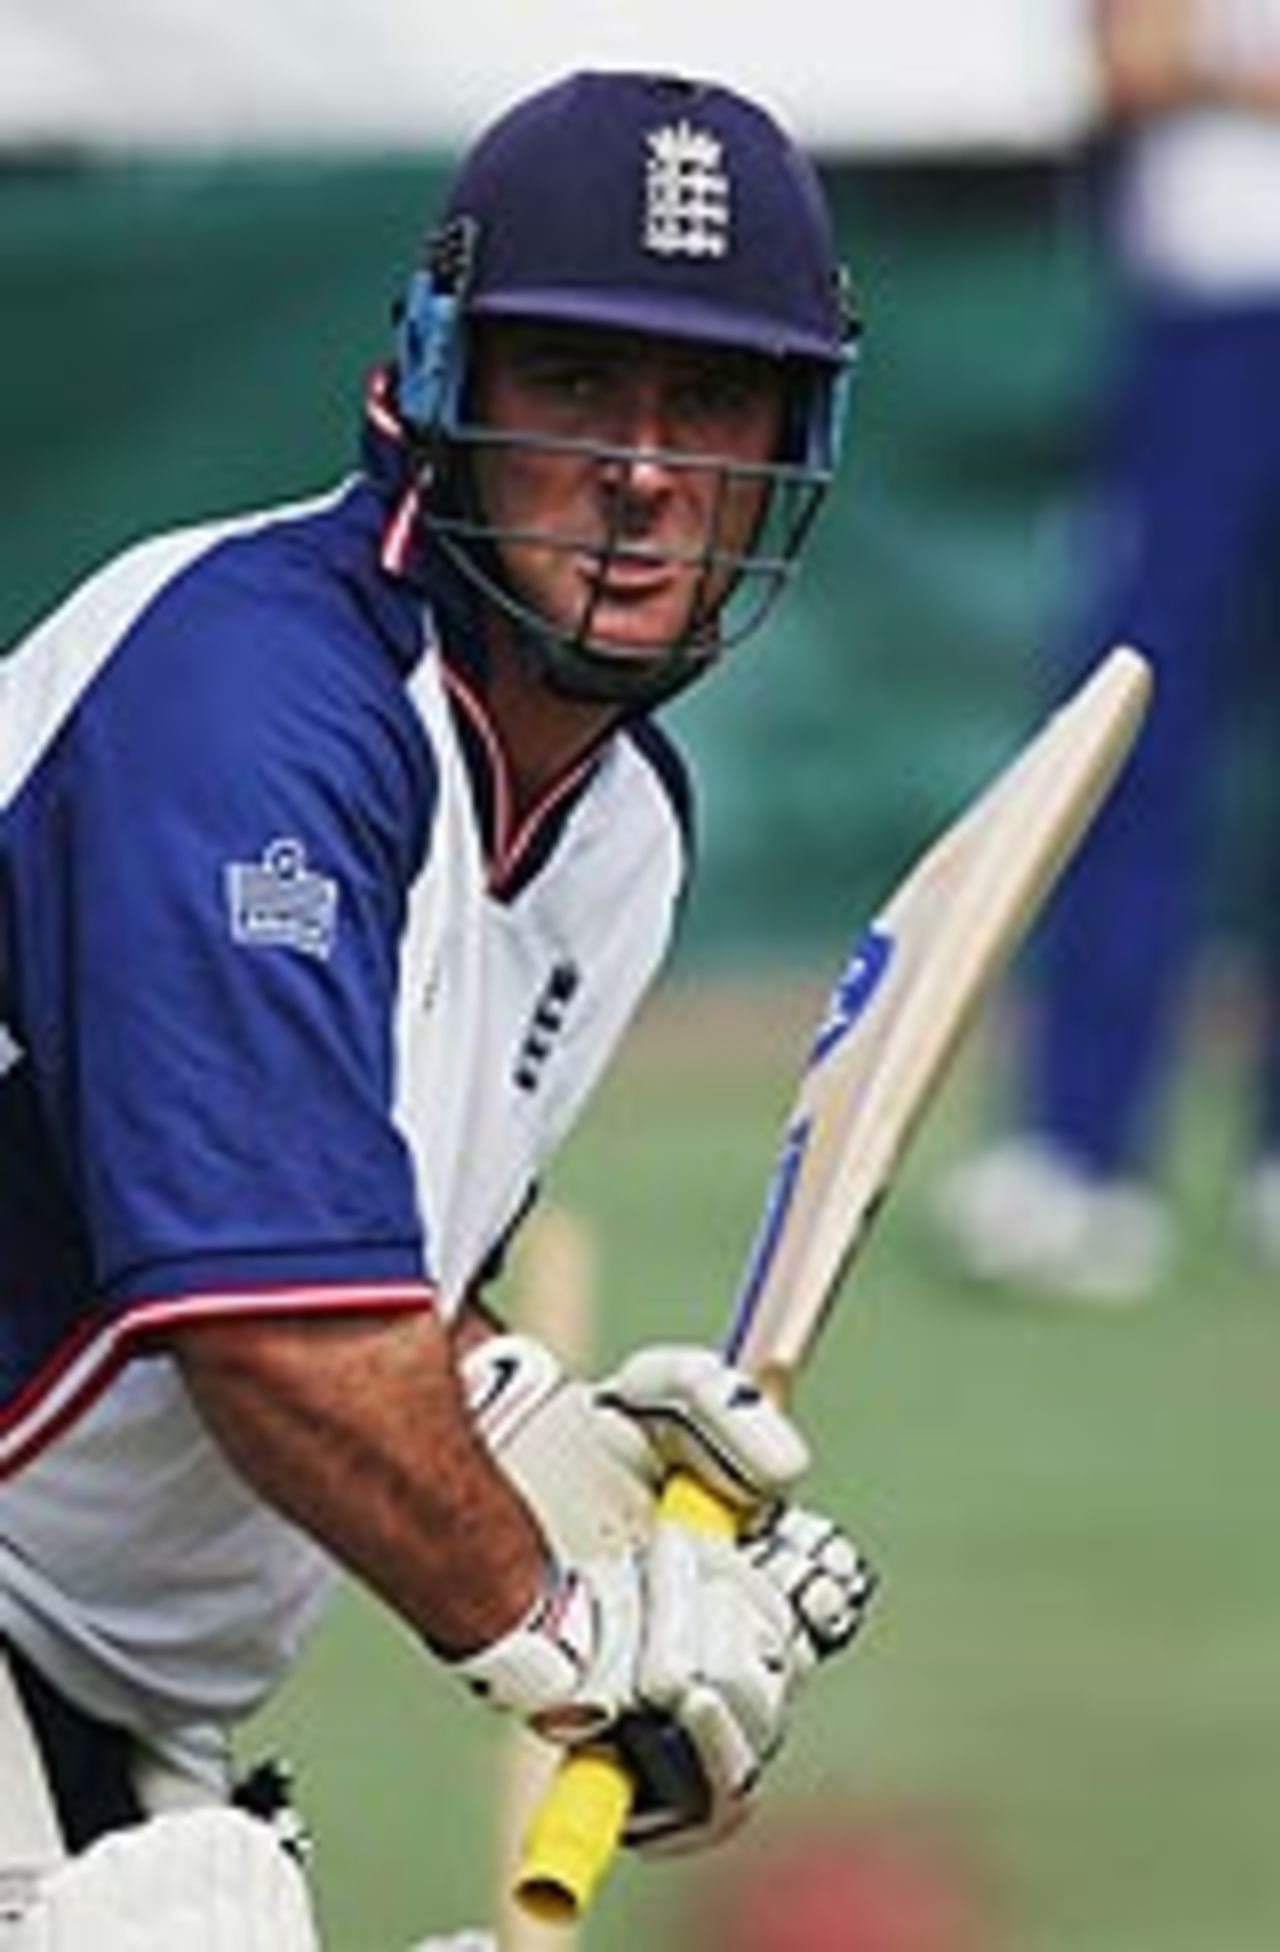 Graham Thorpe practises in the Old Trafford nets, August 11, 2004